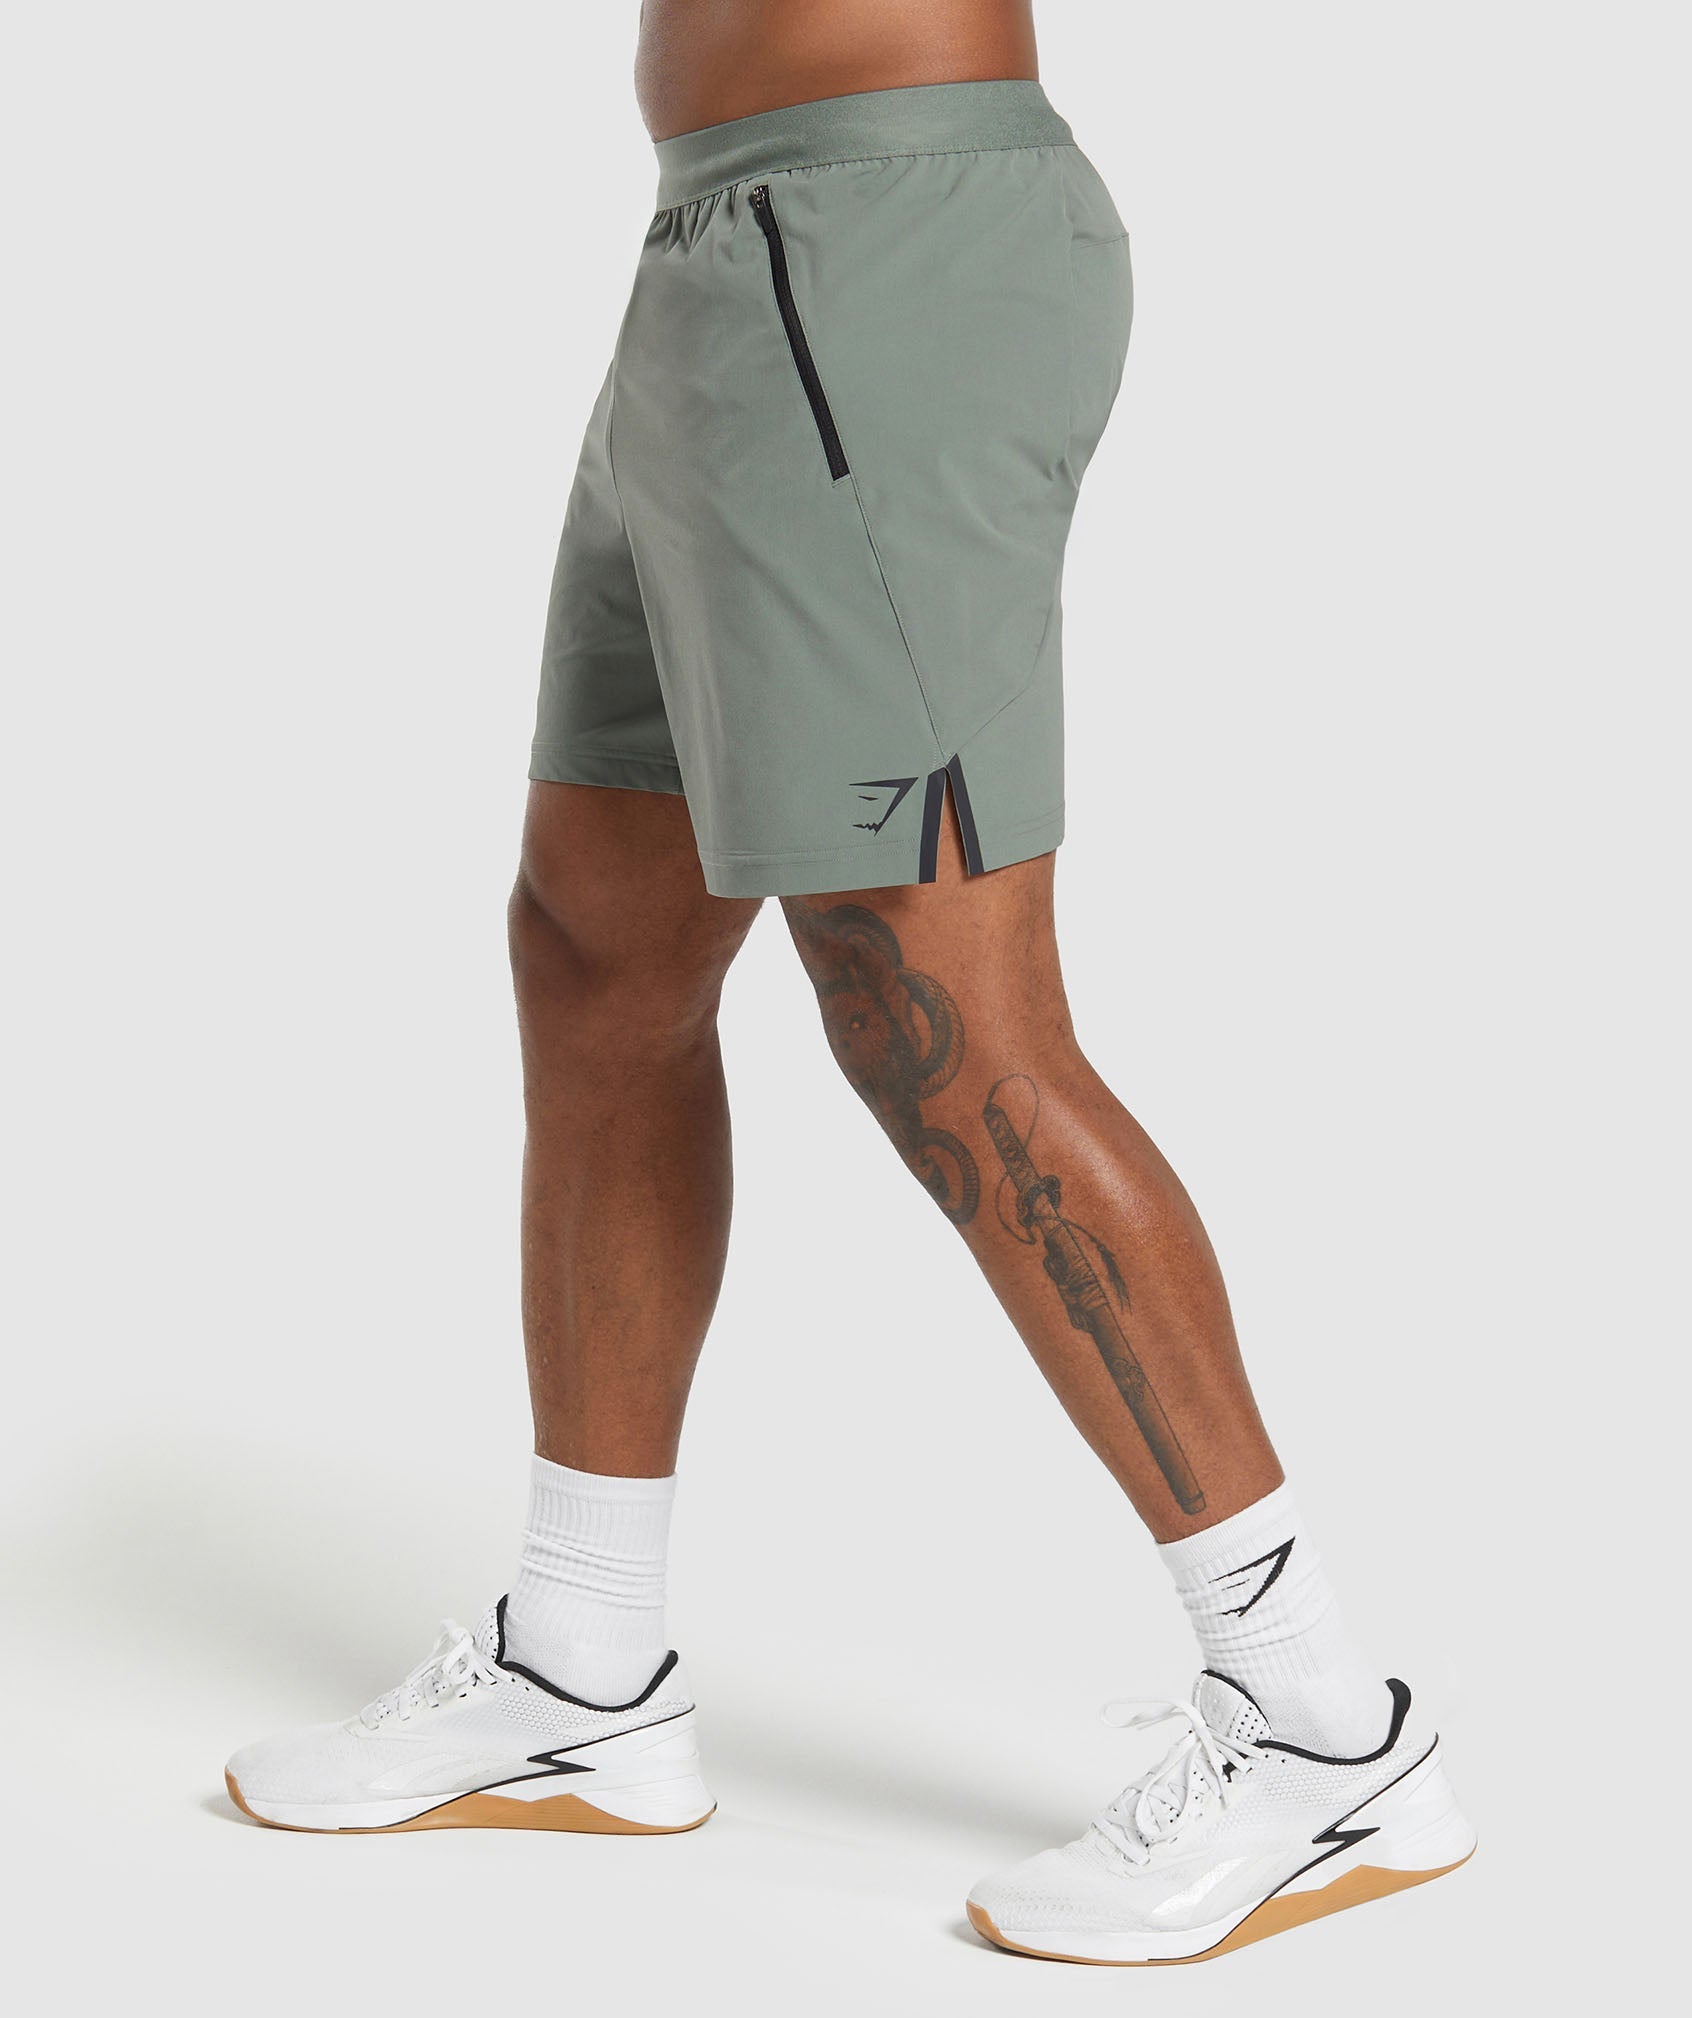 Apex 7" Hybrid Shorts in Unit Green - view 3